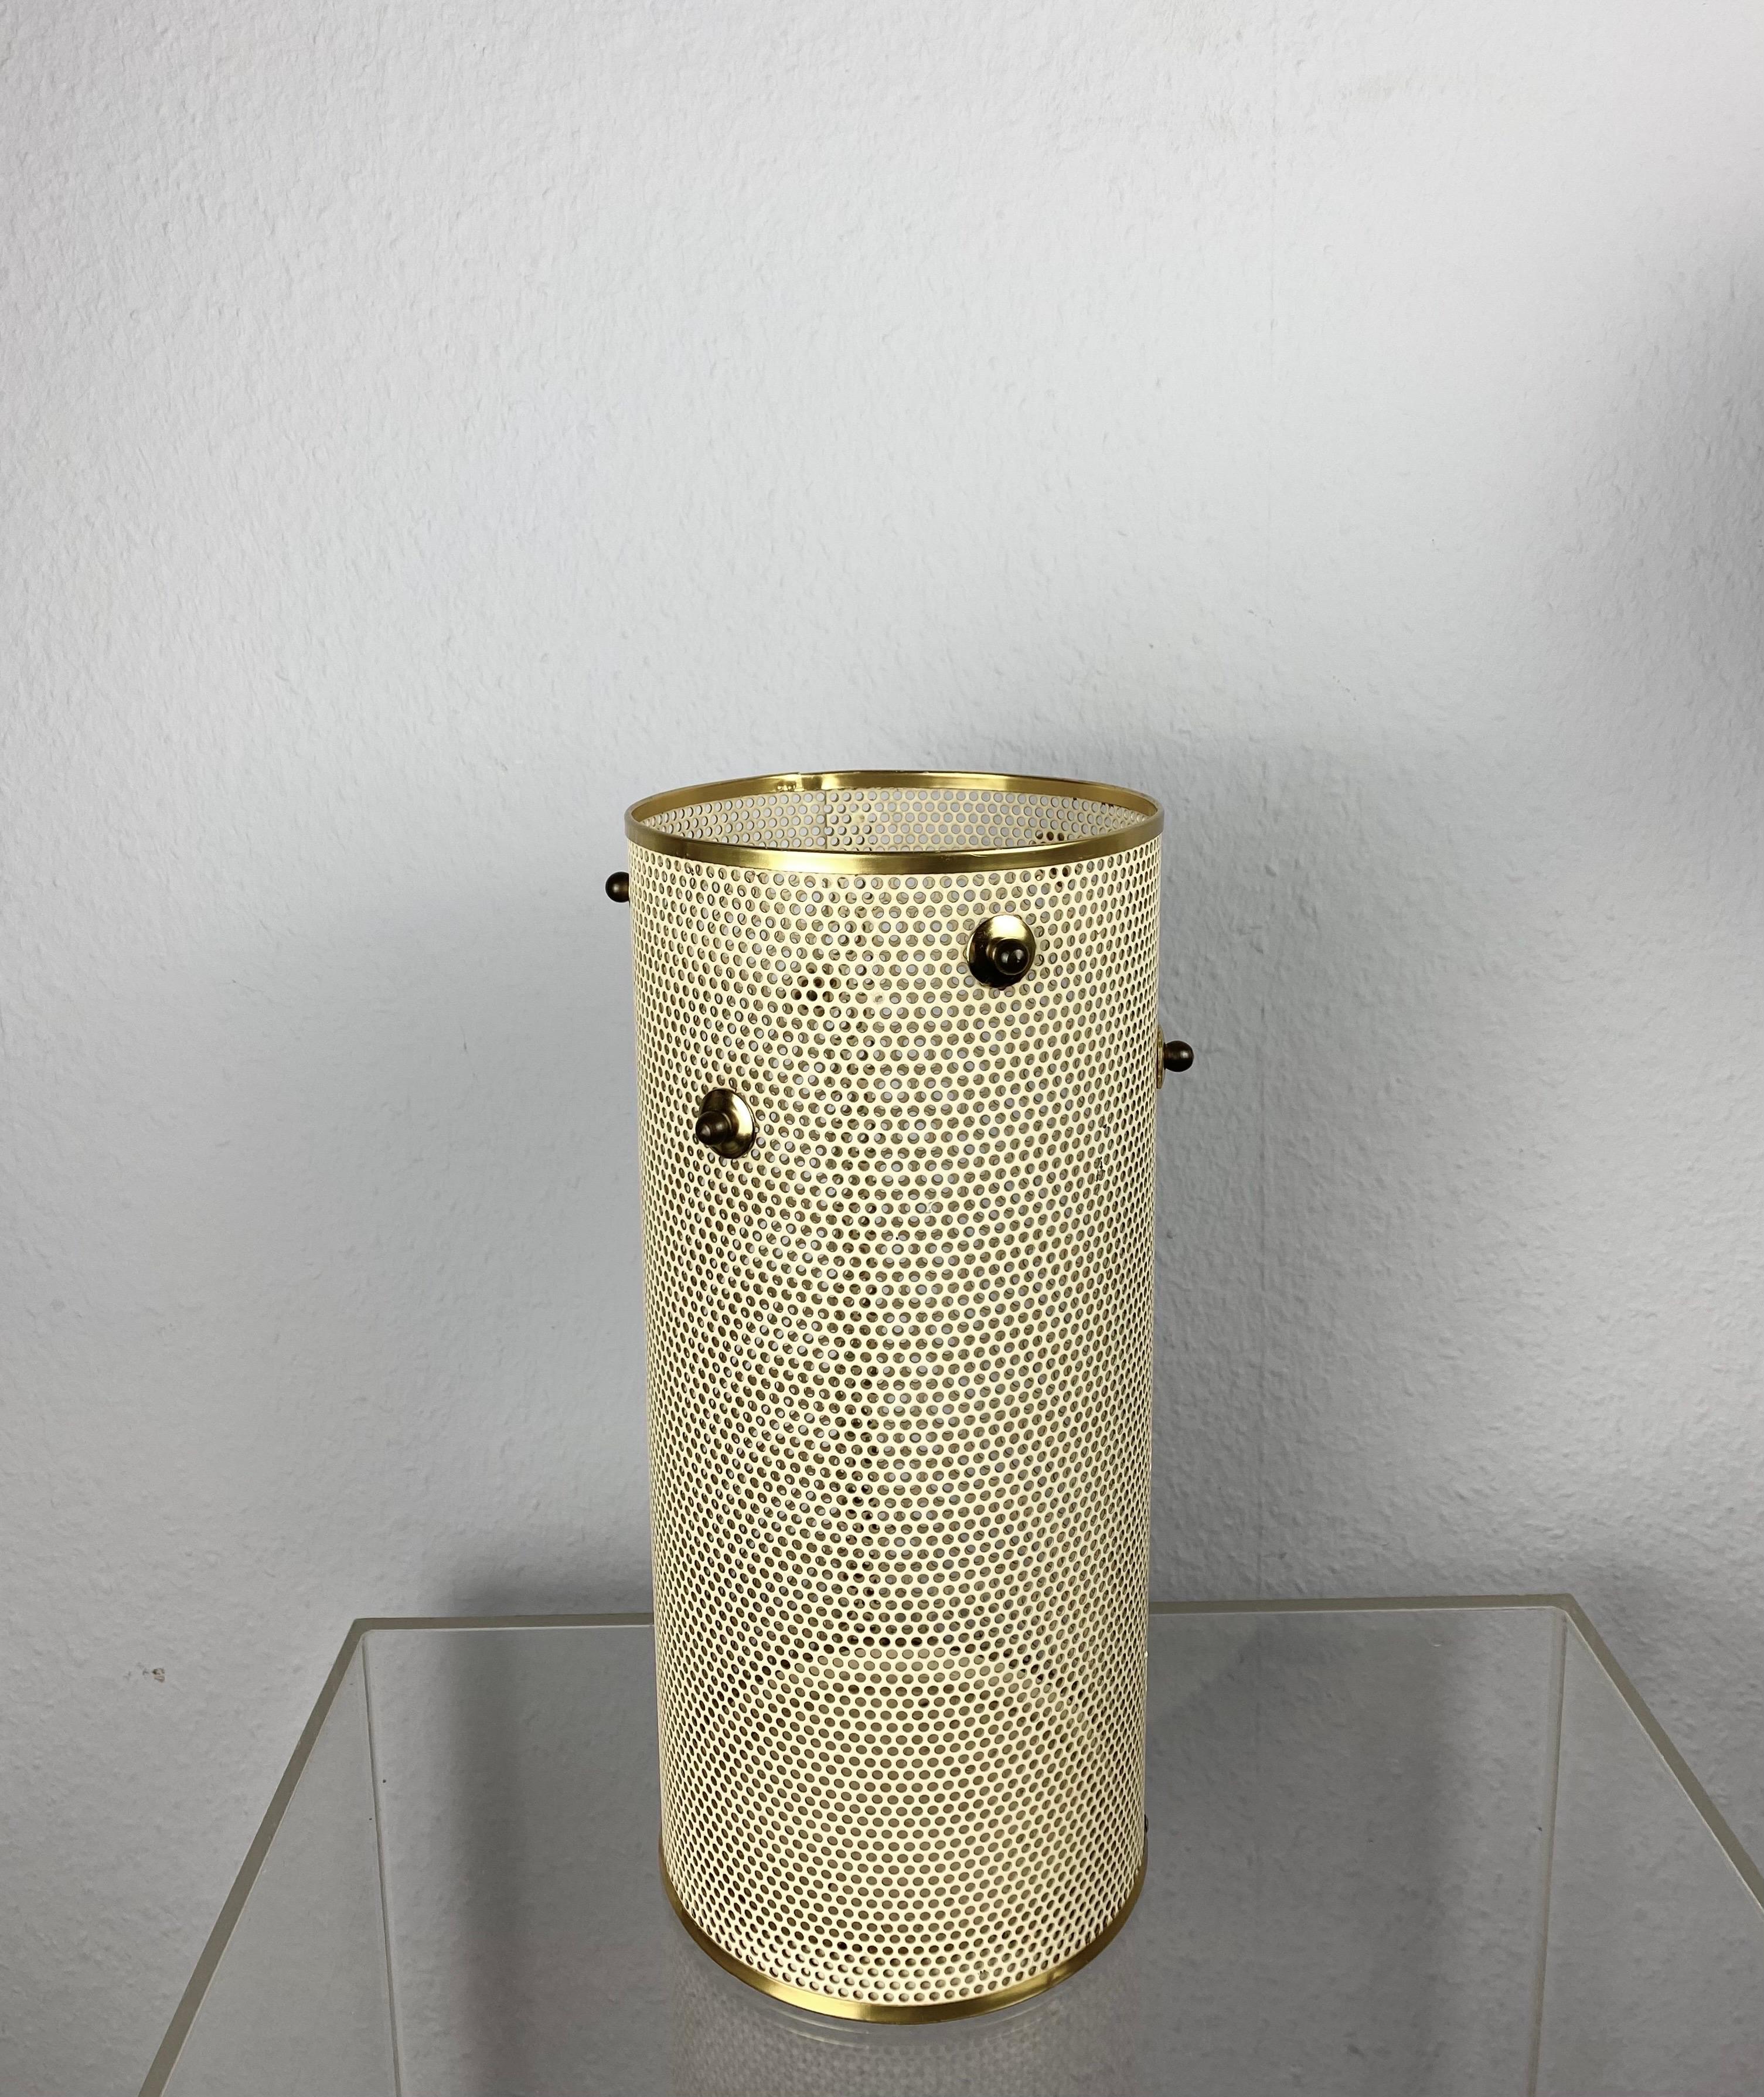 A rare umbrella stand or cylindrical deko-vase in perforated metal with nice brass Details from the 50s.
The stand with the original laquered steel has a beautiful patina and is in a good vintage condition.